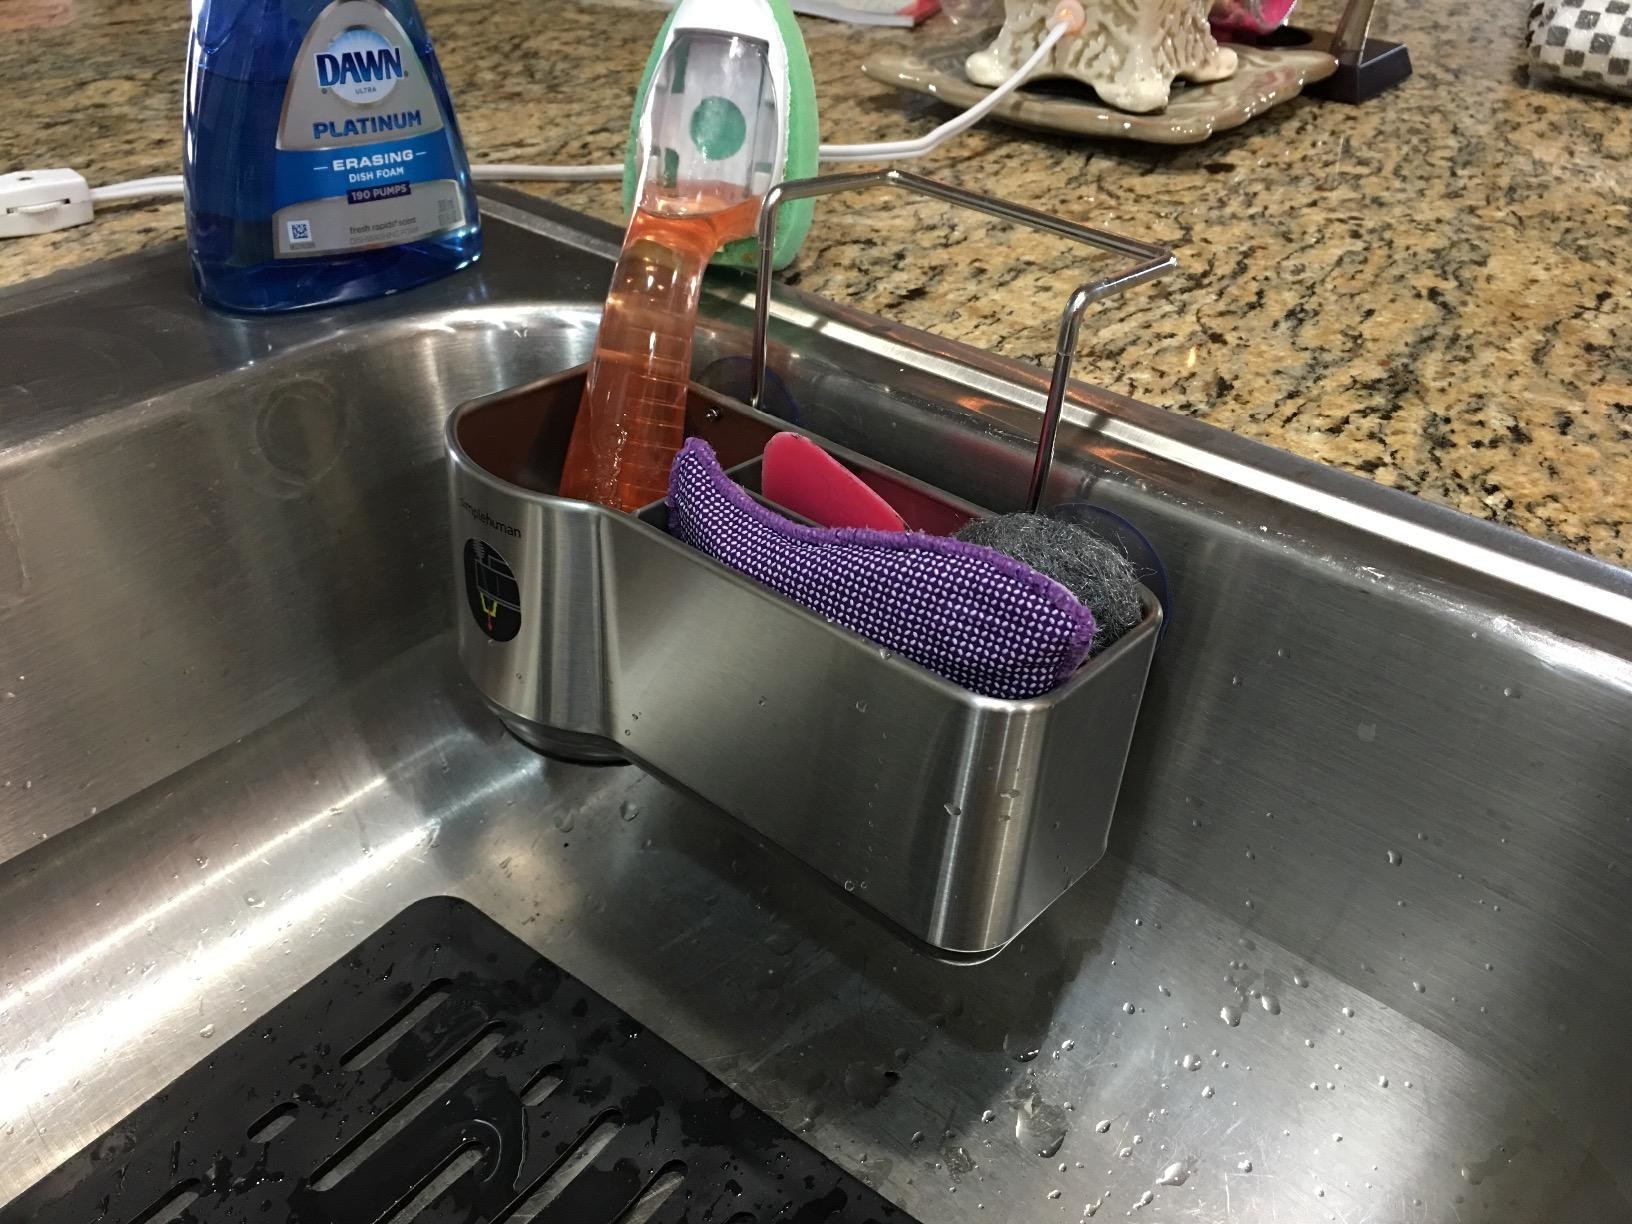 the sink caddy holding sponges and a washing brush